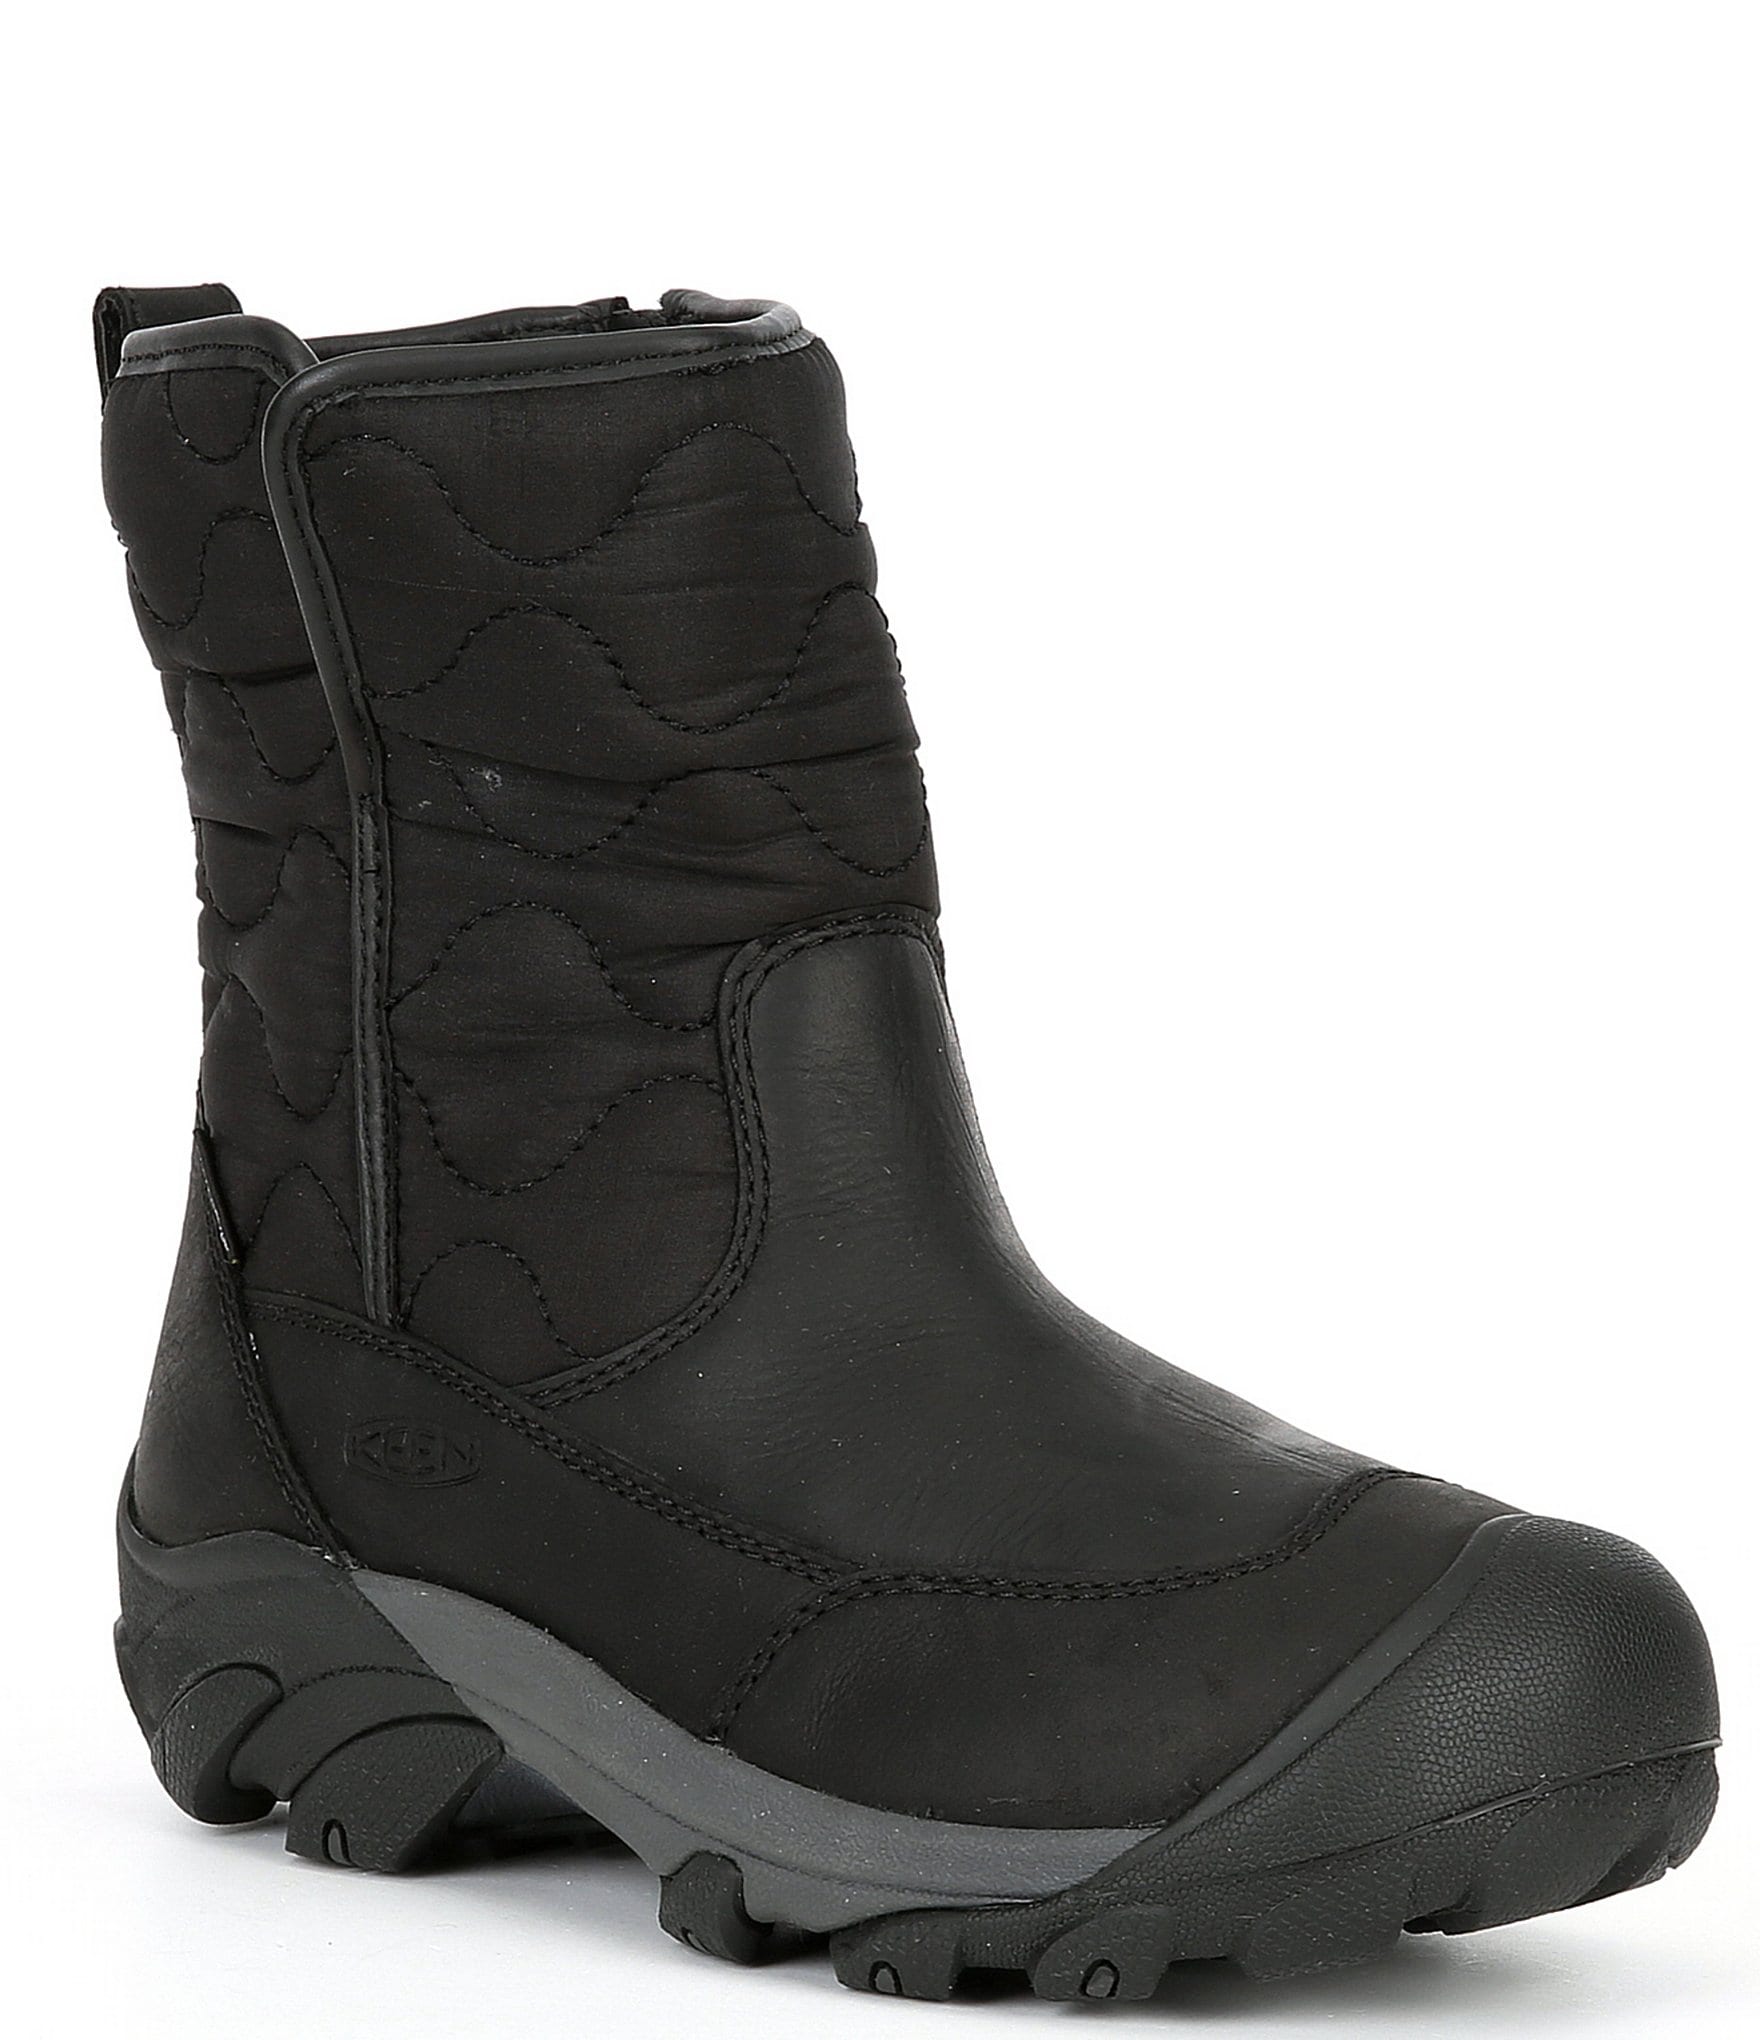 Keen Women's Betty Insulated Slip-On Waterproof Cold Weather Boots ...